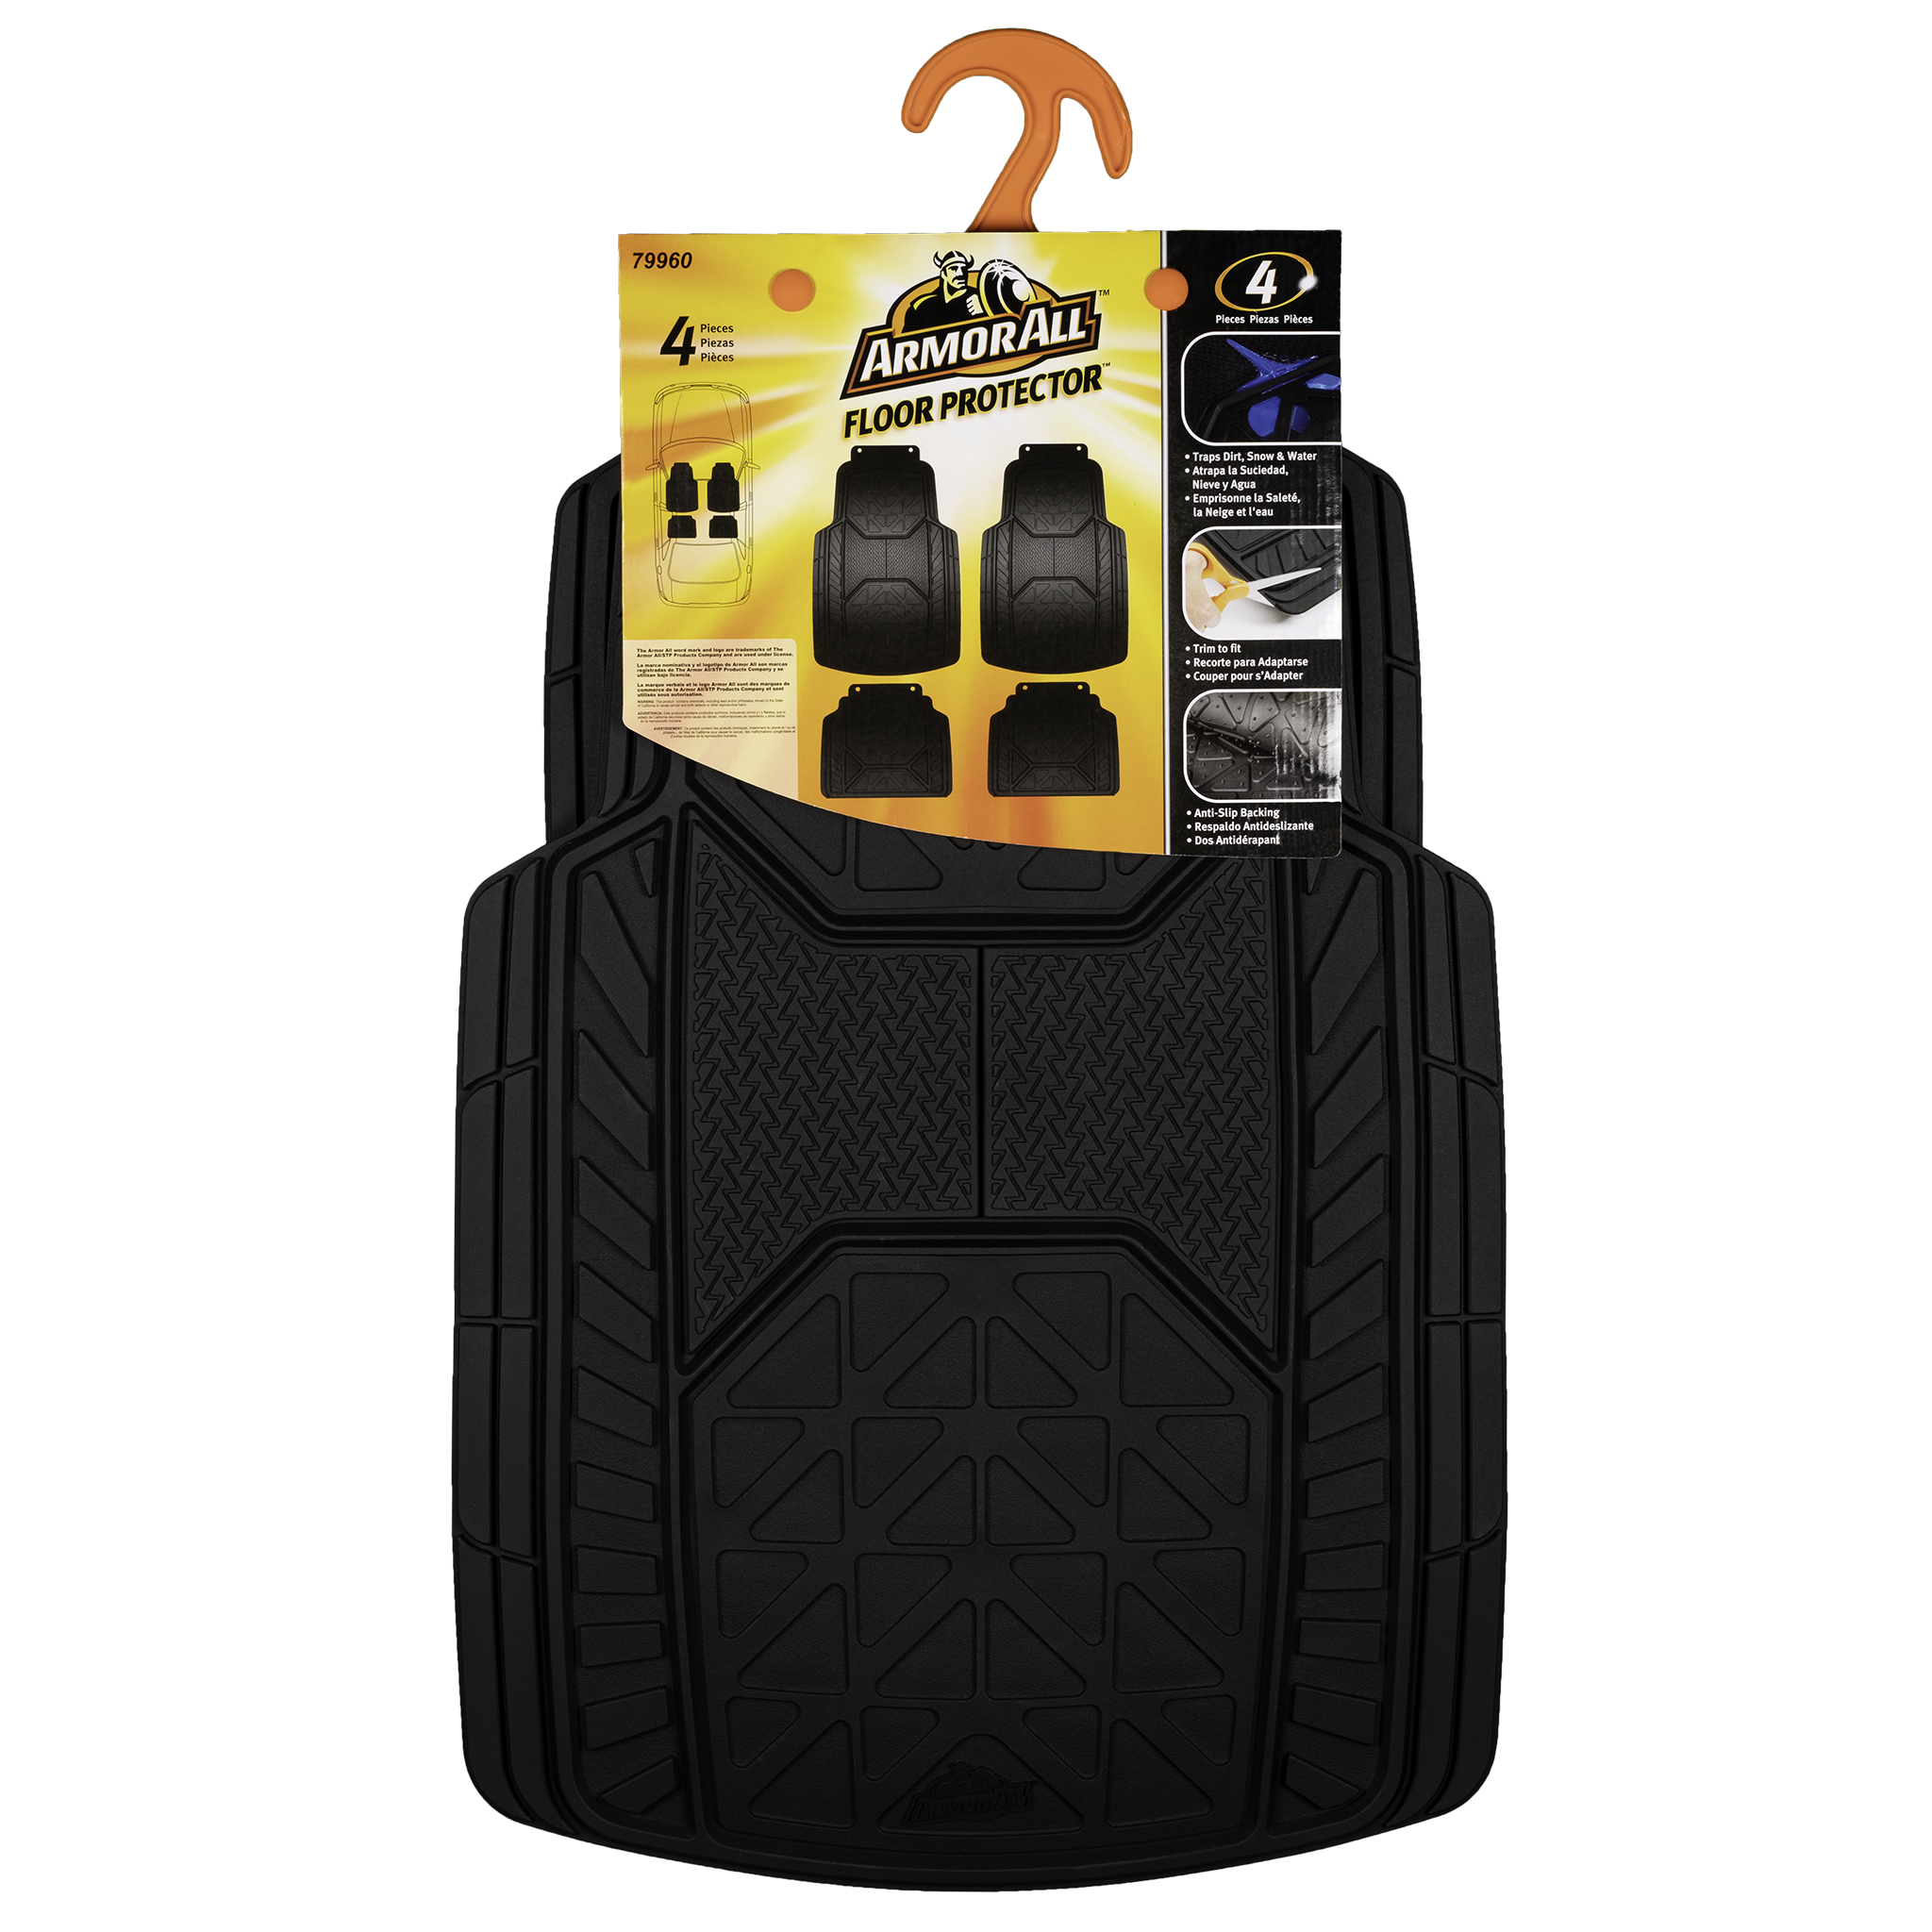 Armor All Floor Mats - Packaging Front Cropped (white).jpg